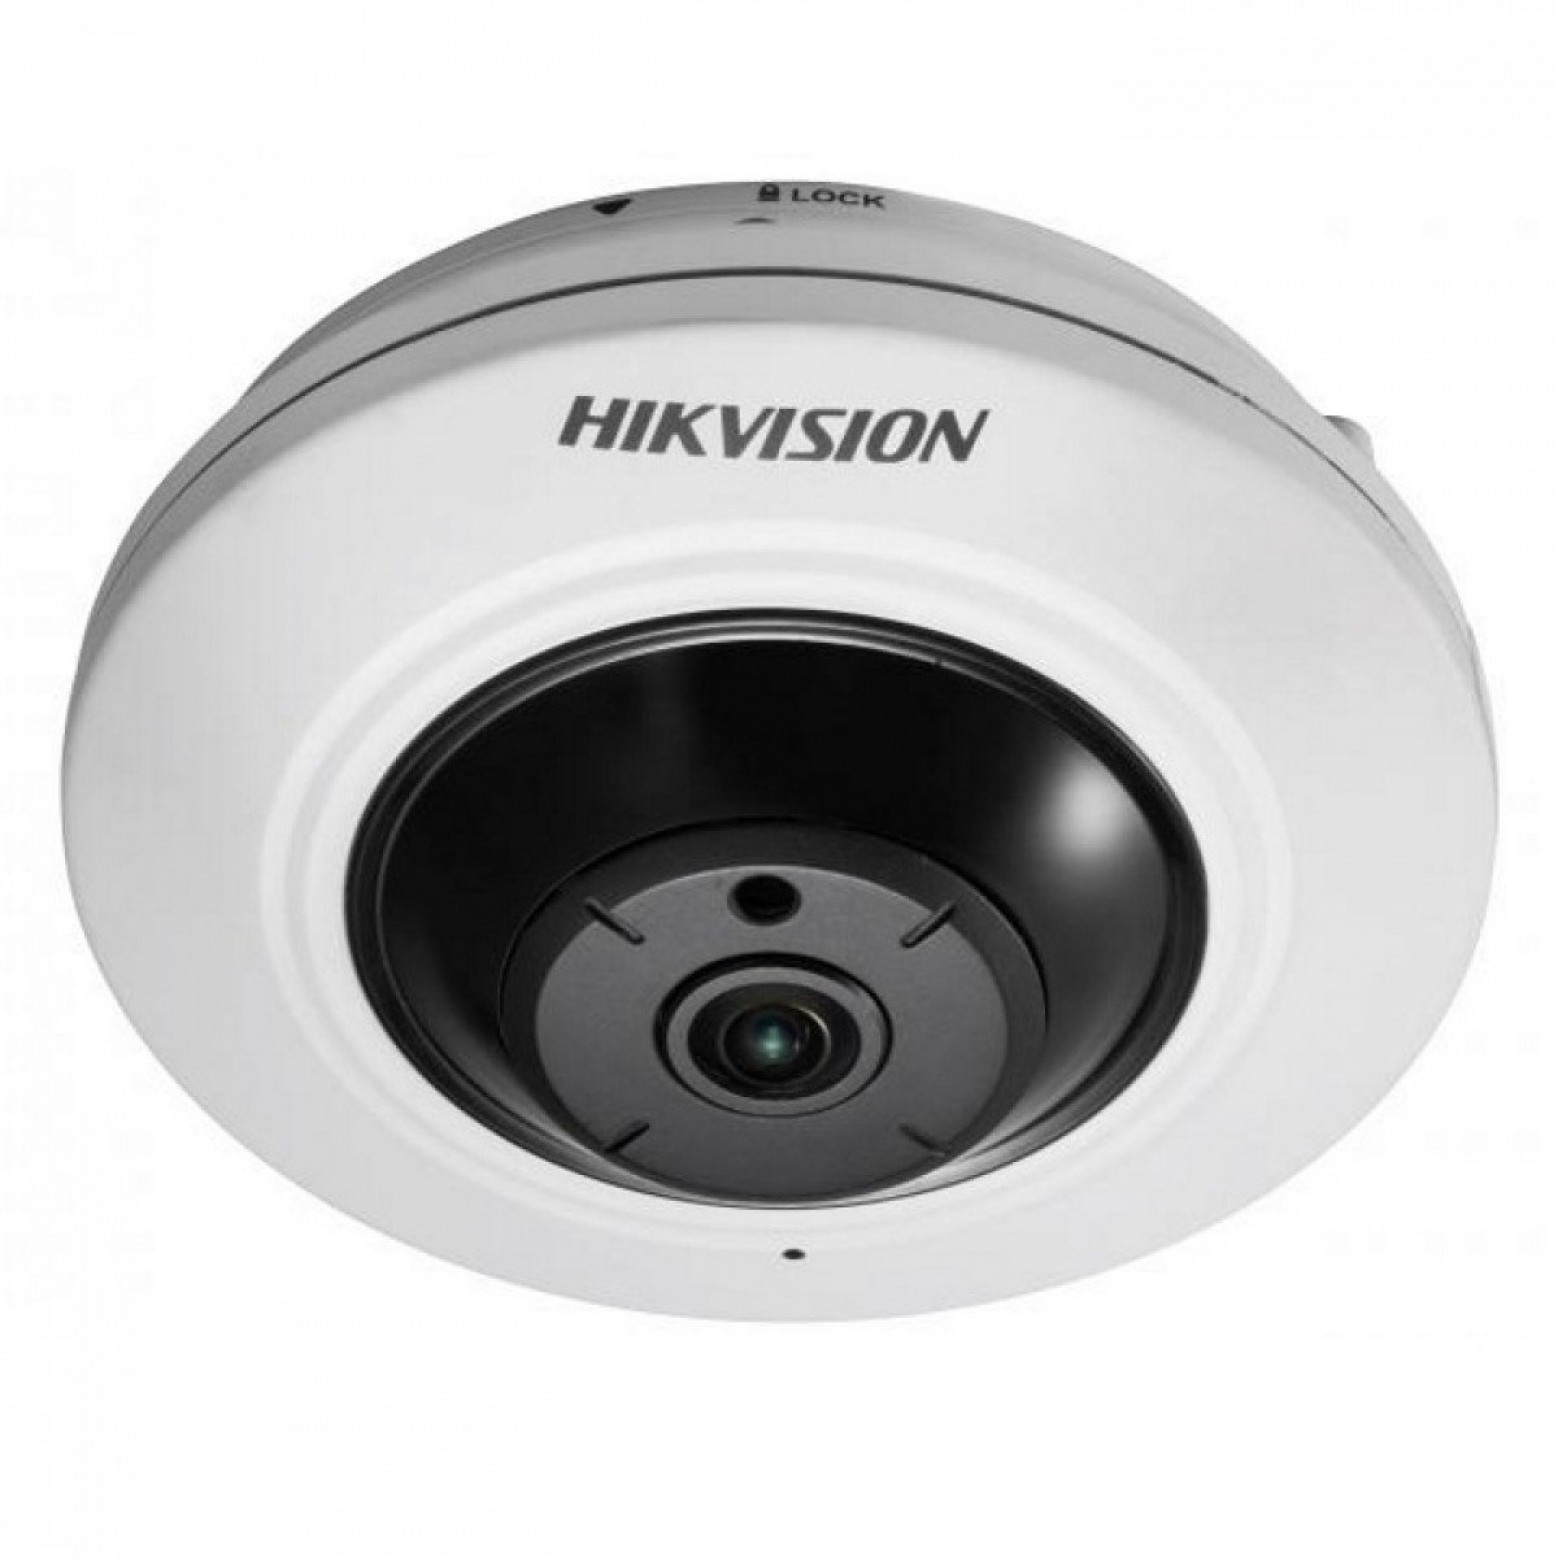 Hikvision DS-2CD2955FWD-I, Gouden Label, Fish Eye, 5MP, IR